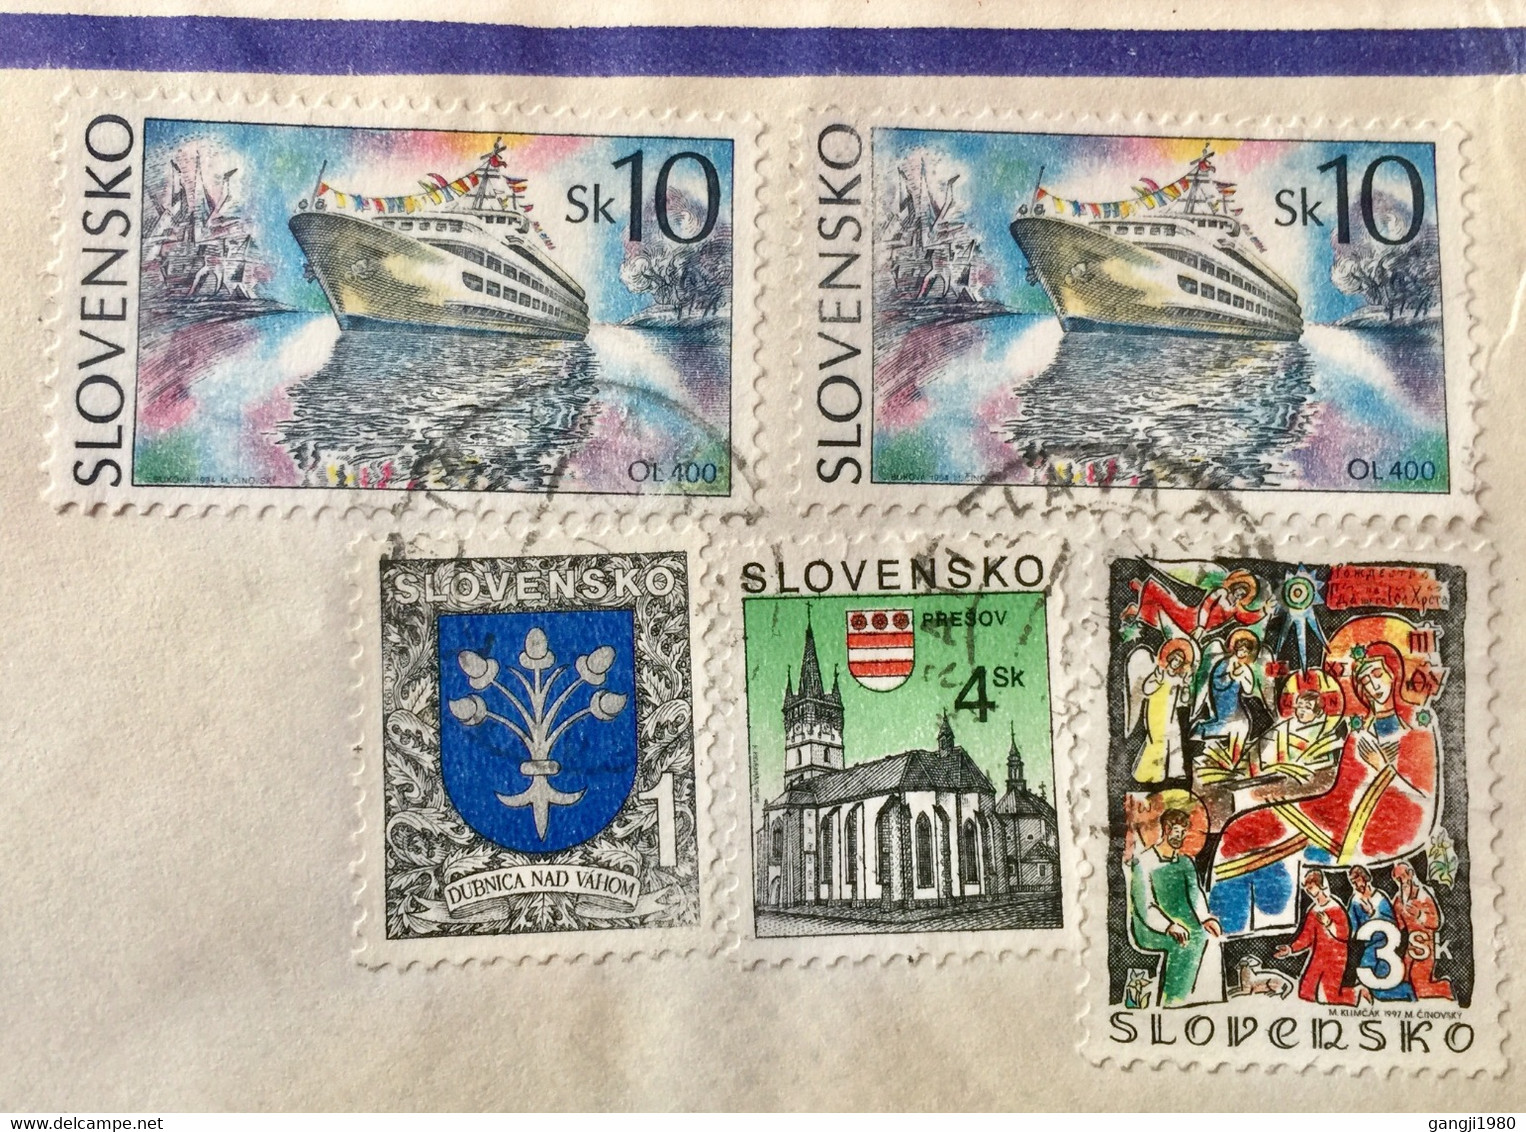 SLOVAKIA 2005, USED AIRMAIL COVER TO INDIA ,5 STAMPS 38SK RATE !SHIP, PRESOV,BUILDING,CHURCH,FAIRYTALES,ART ,PAINTING - Covers & Documents